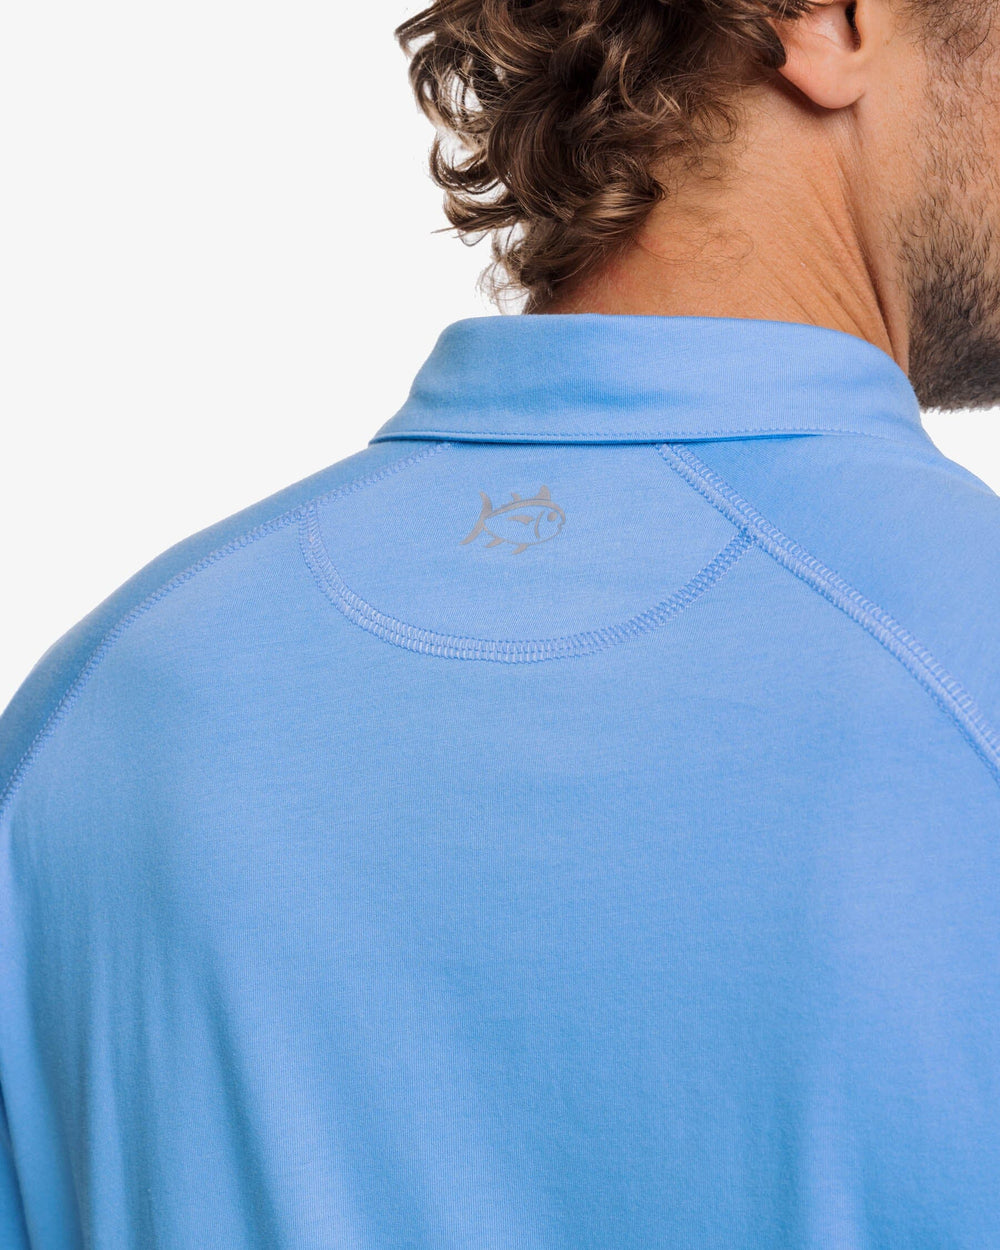 The detail view of the Southern Tide Racquet Polo Shirt by Southern Tide - Boat Blue